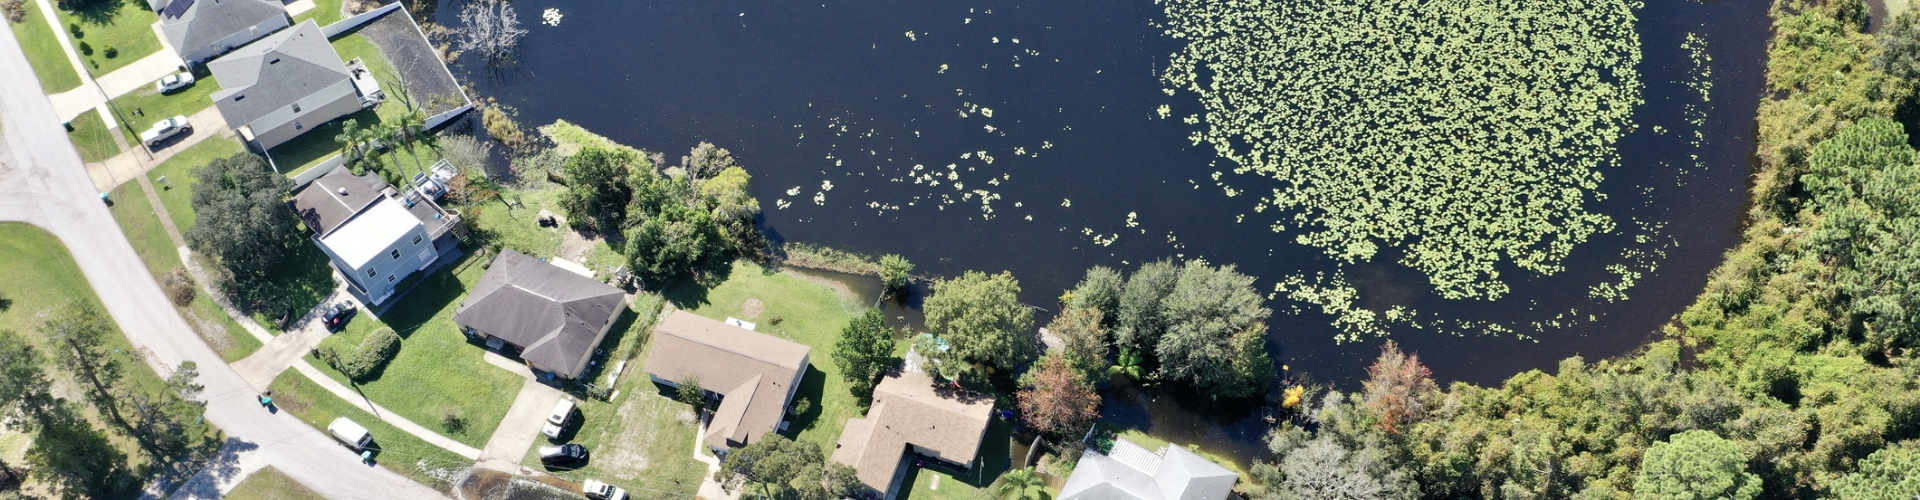 an aerial view of a lake surrounded by houses and trees in Florida